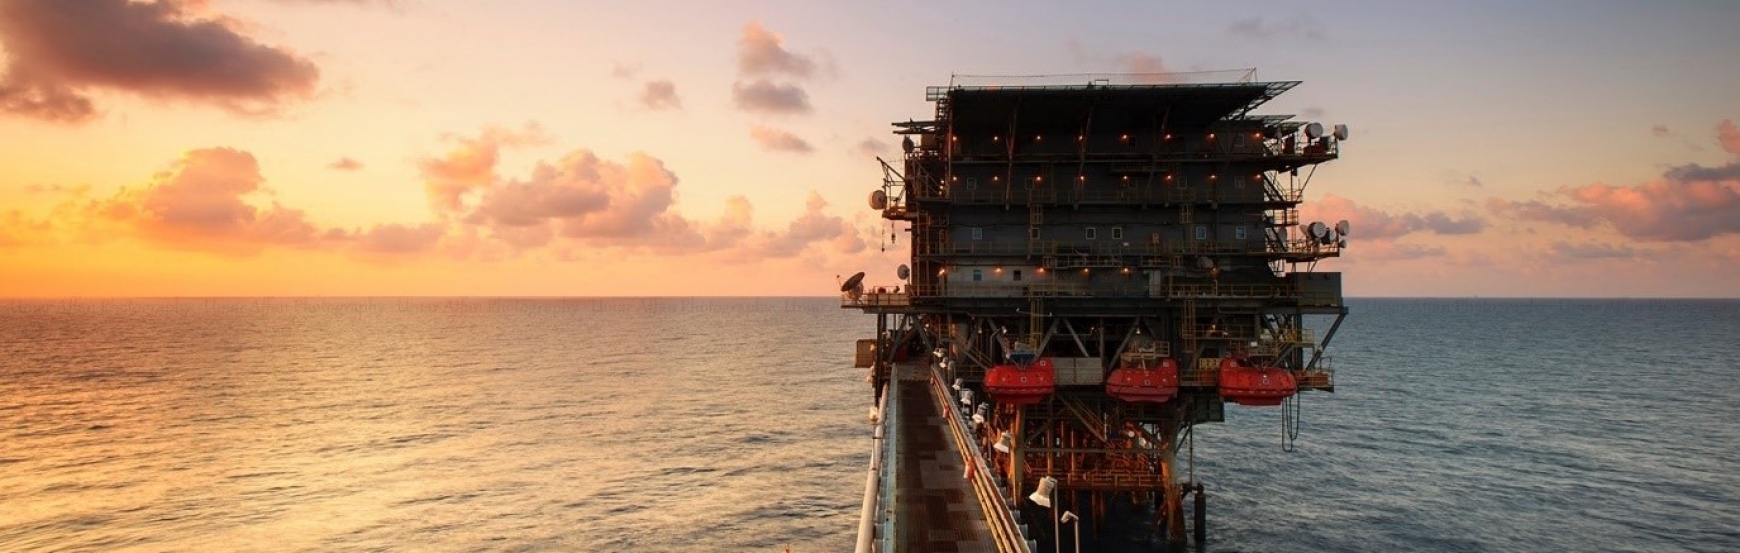 oil rig in the ocean with a sunset